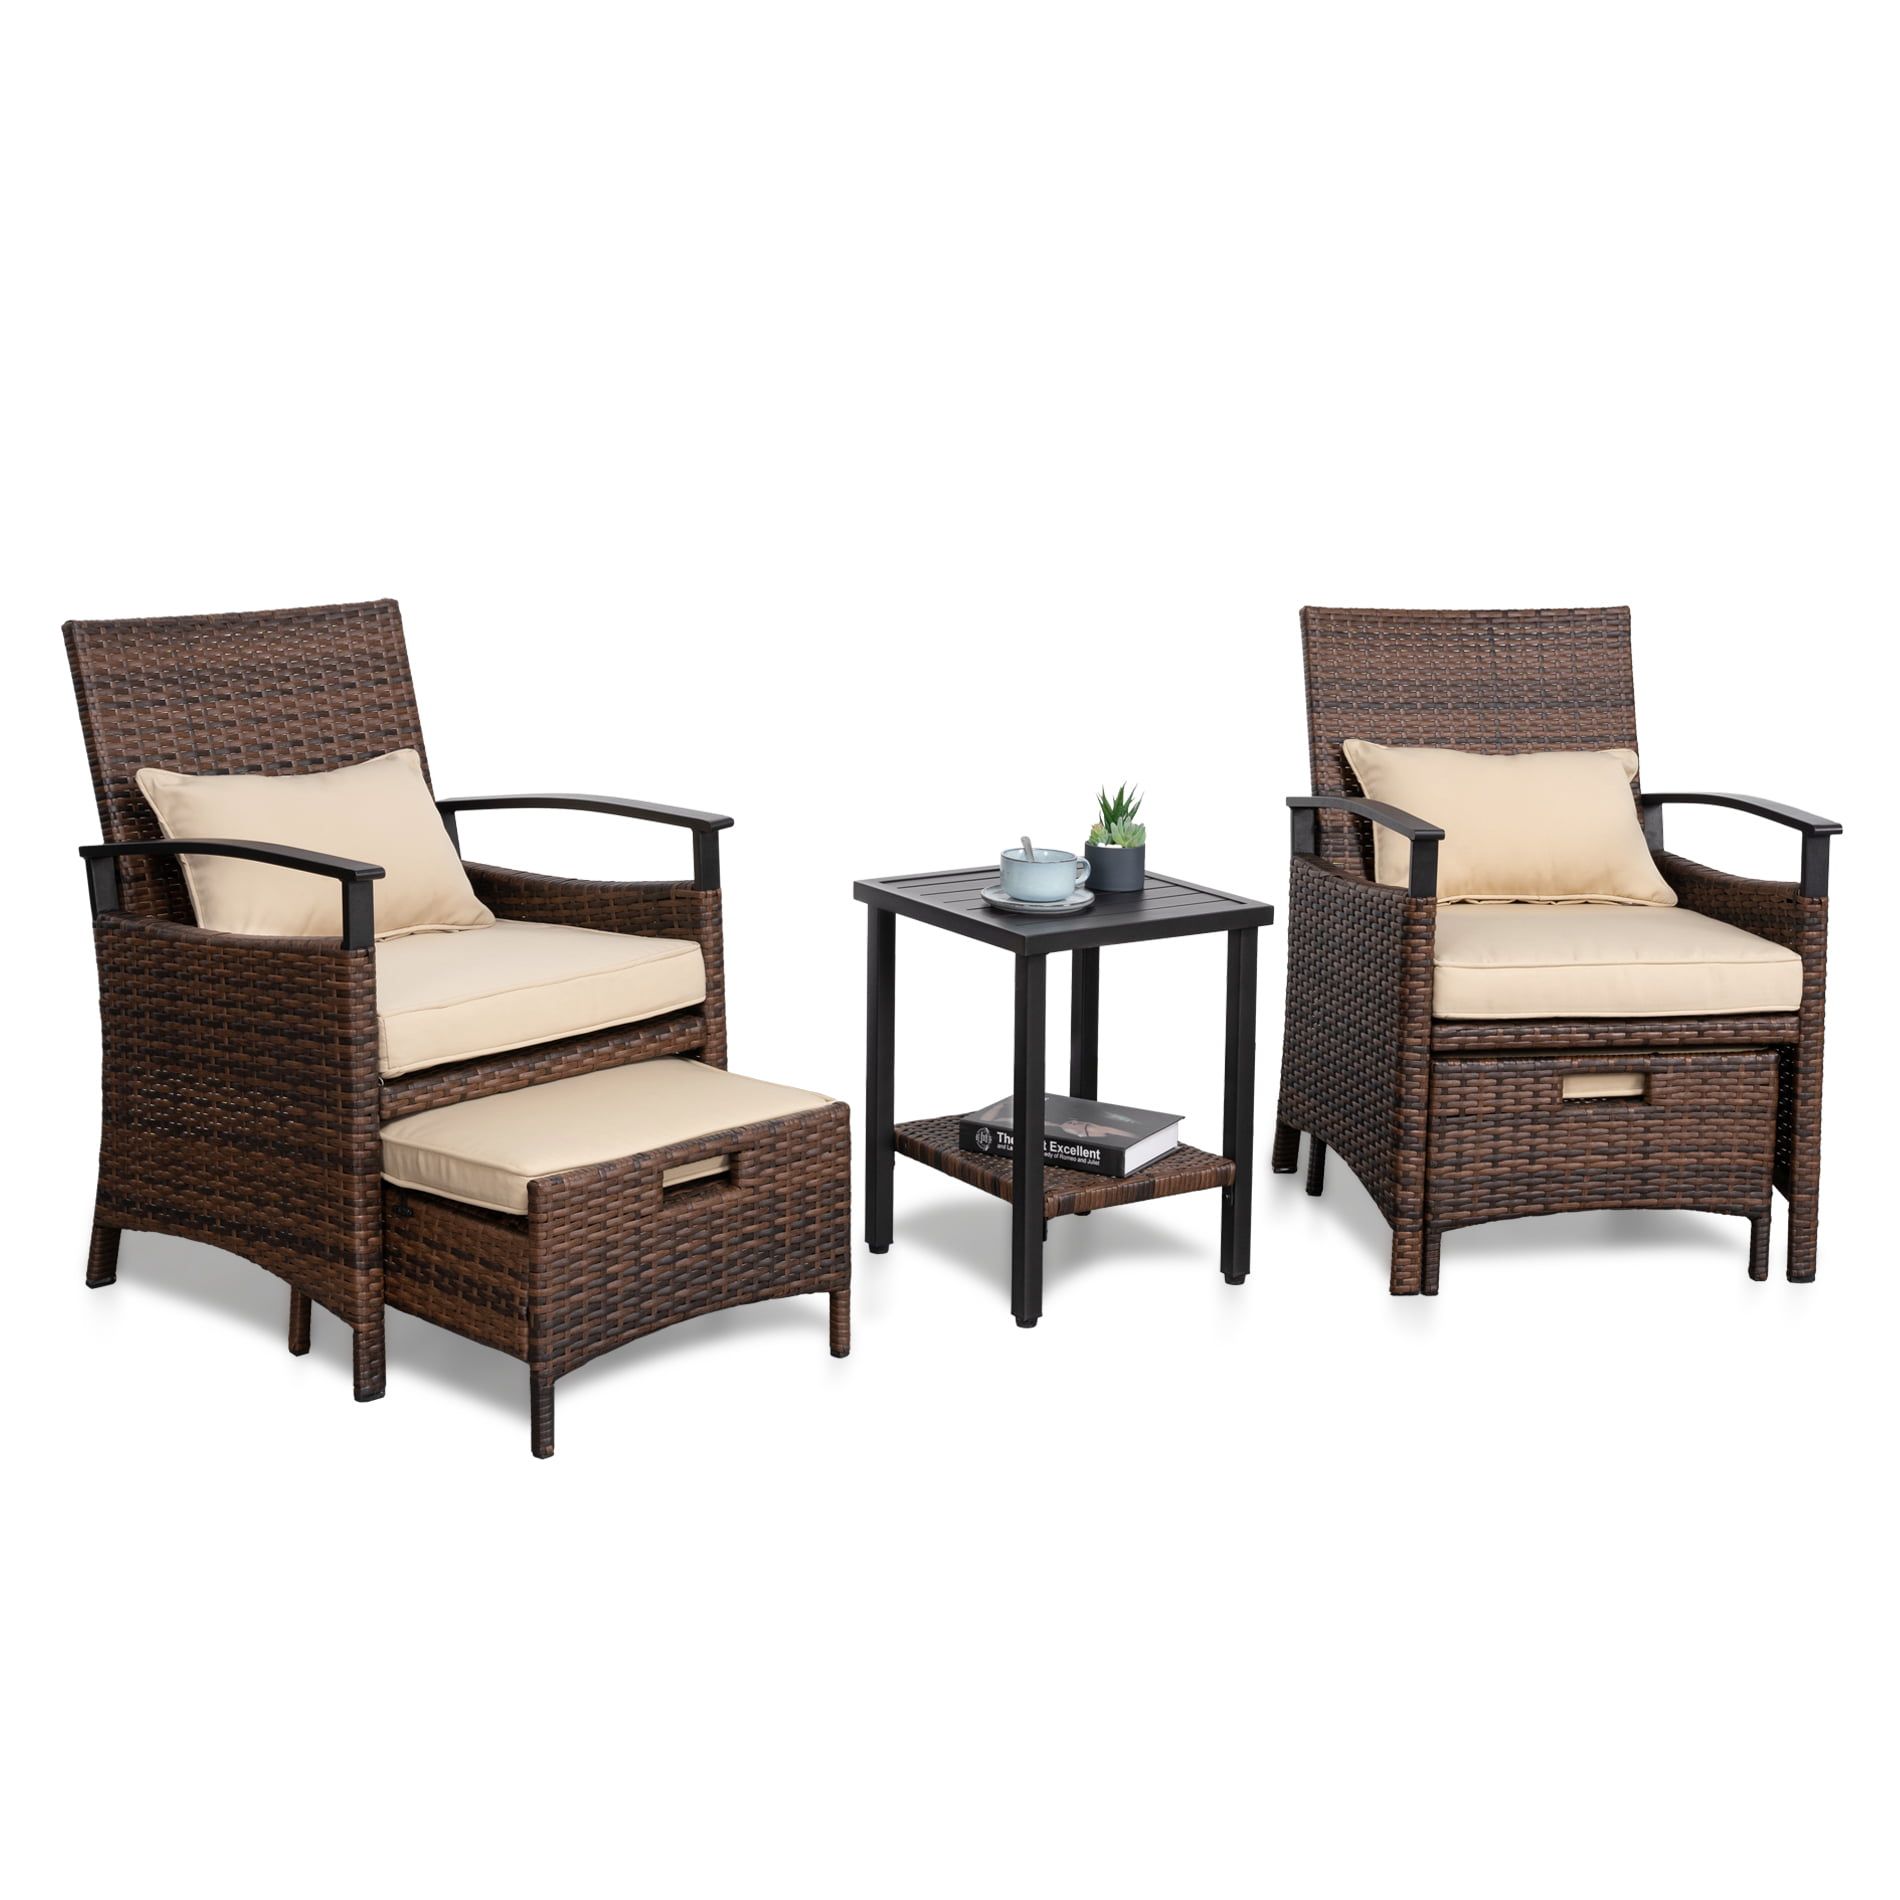 5 Piece Wicker Patio Furniture Set Outdoor Chairs And Ottomans – Walmart With Regard To Ottomans Patio Furniture Set (View 4 of 15)